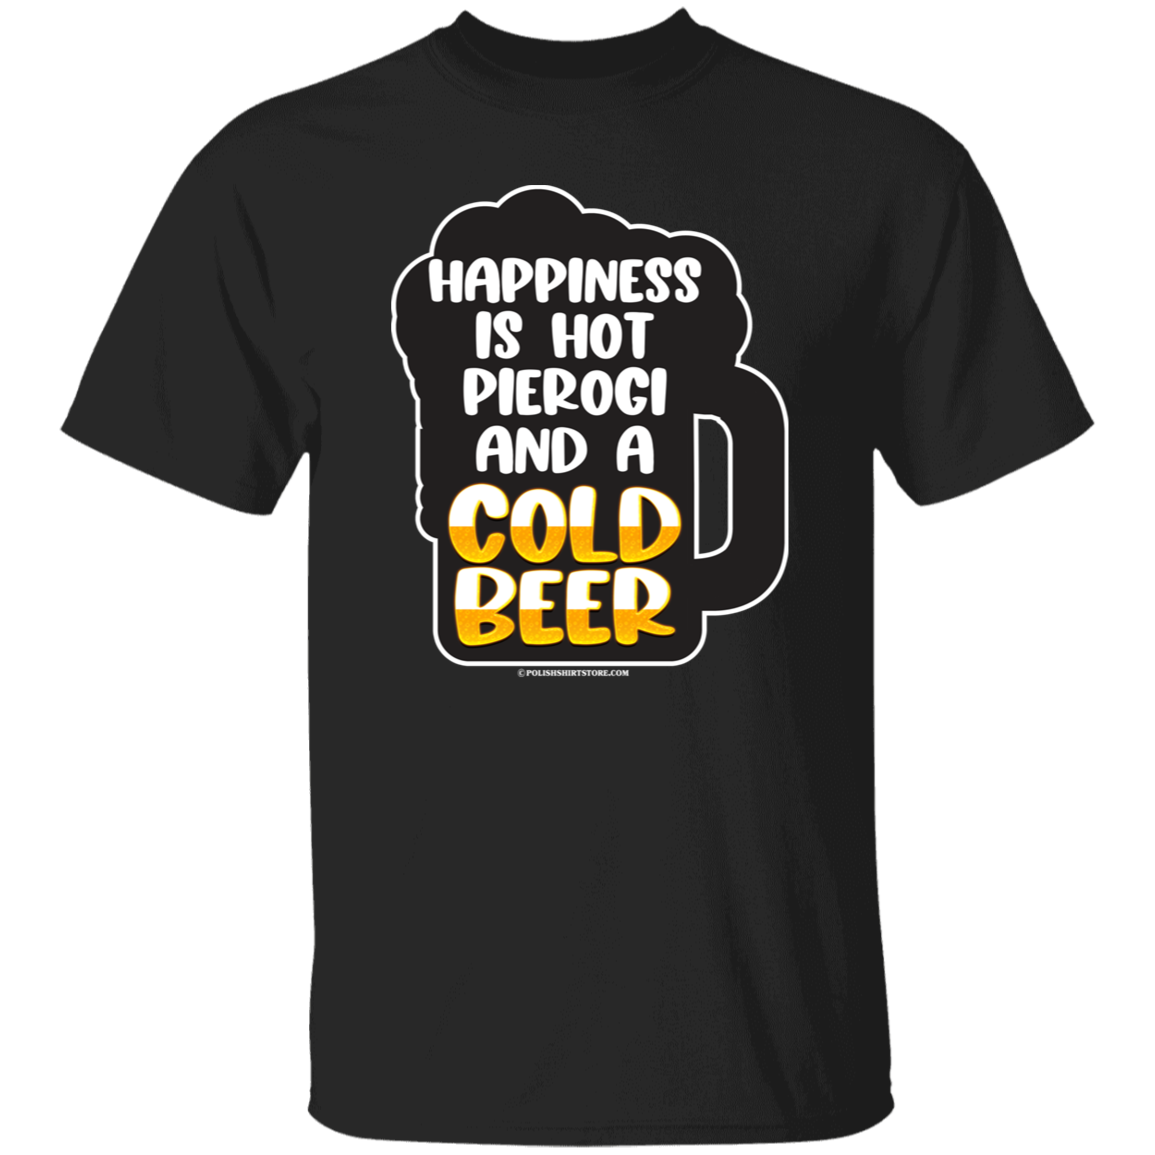 Happiness Is Hot Pierogi And A Cold Beer Apparel CustomCat G500 5.3 oz. T-Shirt Black S